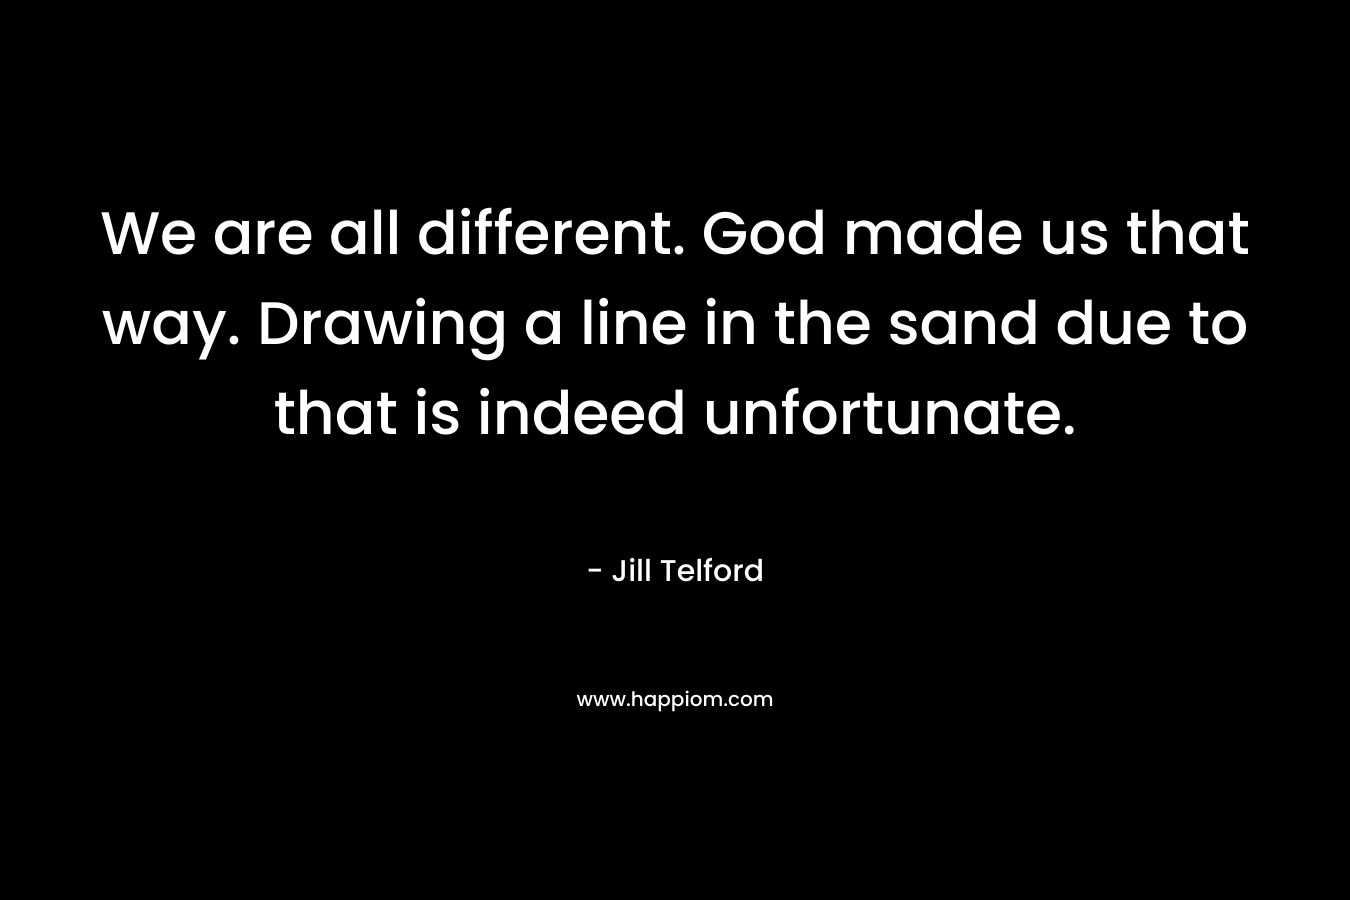 We are all different. God made us that way. Drawing a line in the sand due to that is indeed unfortunate. – Jill Telford